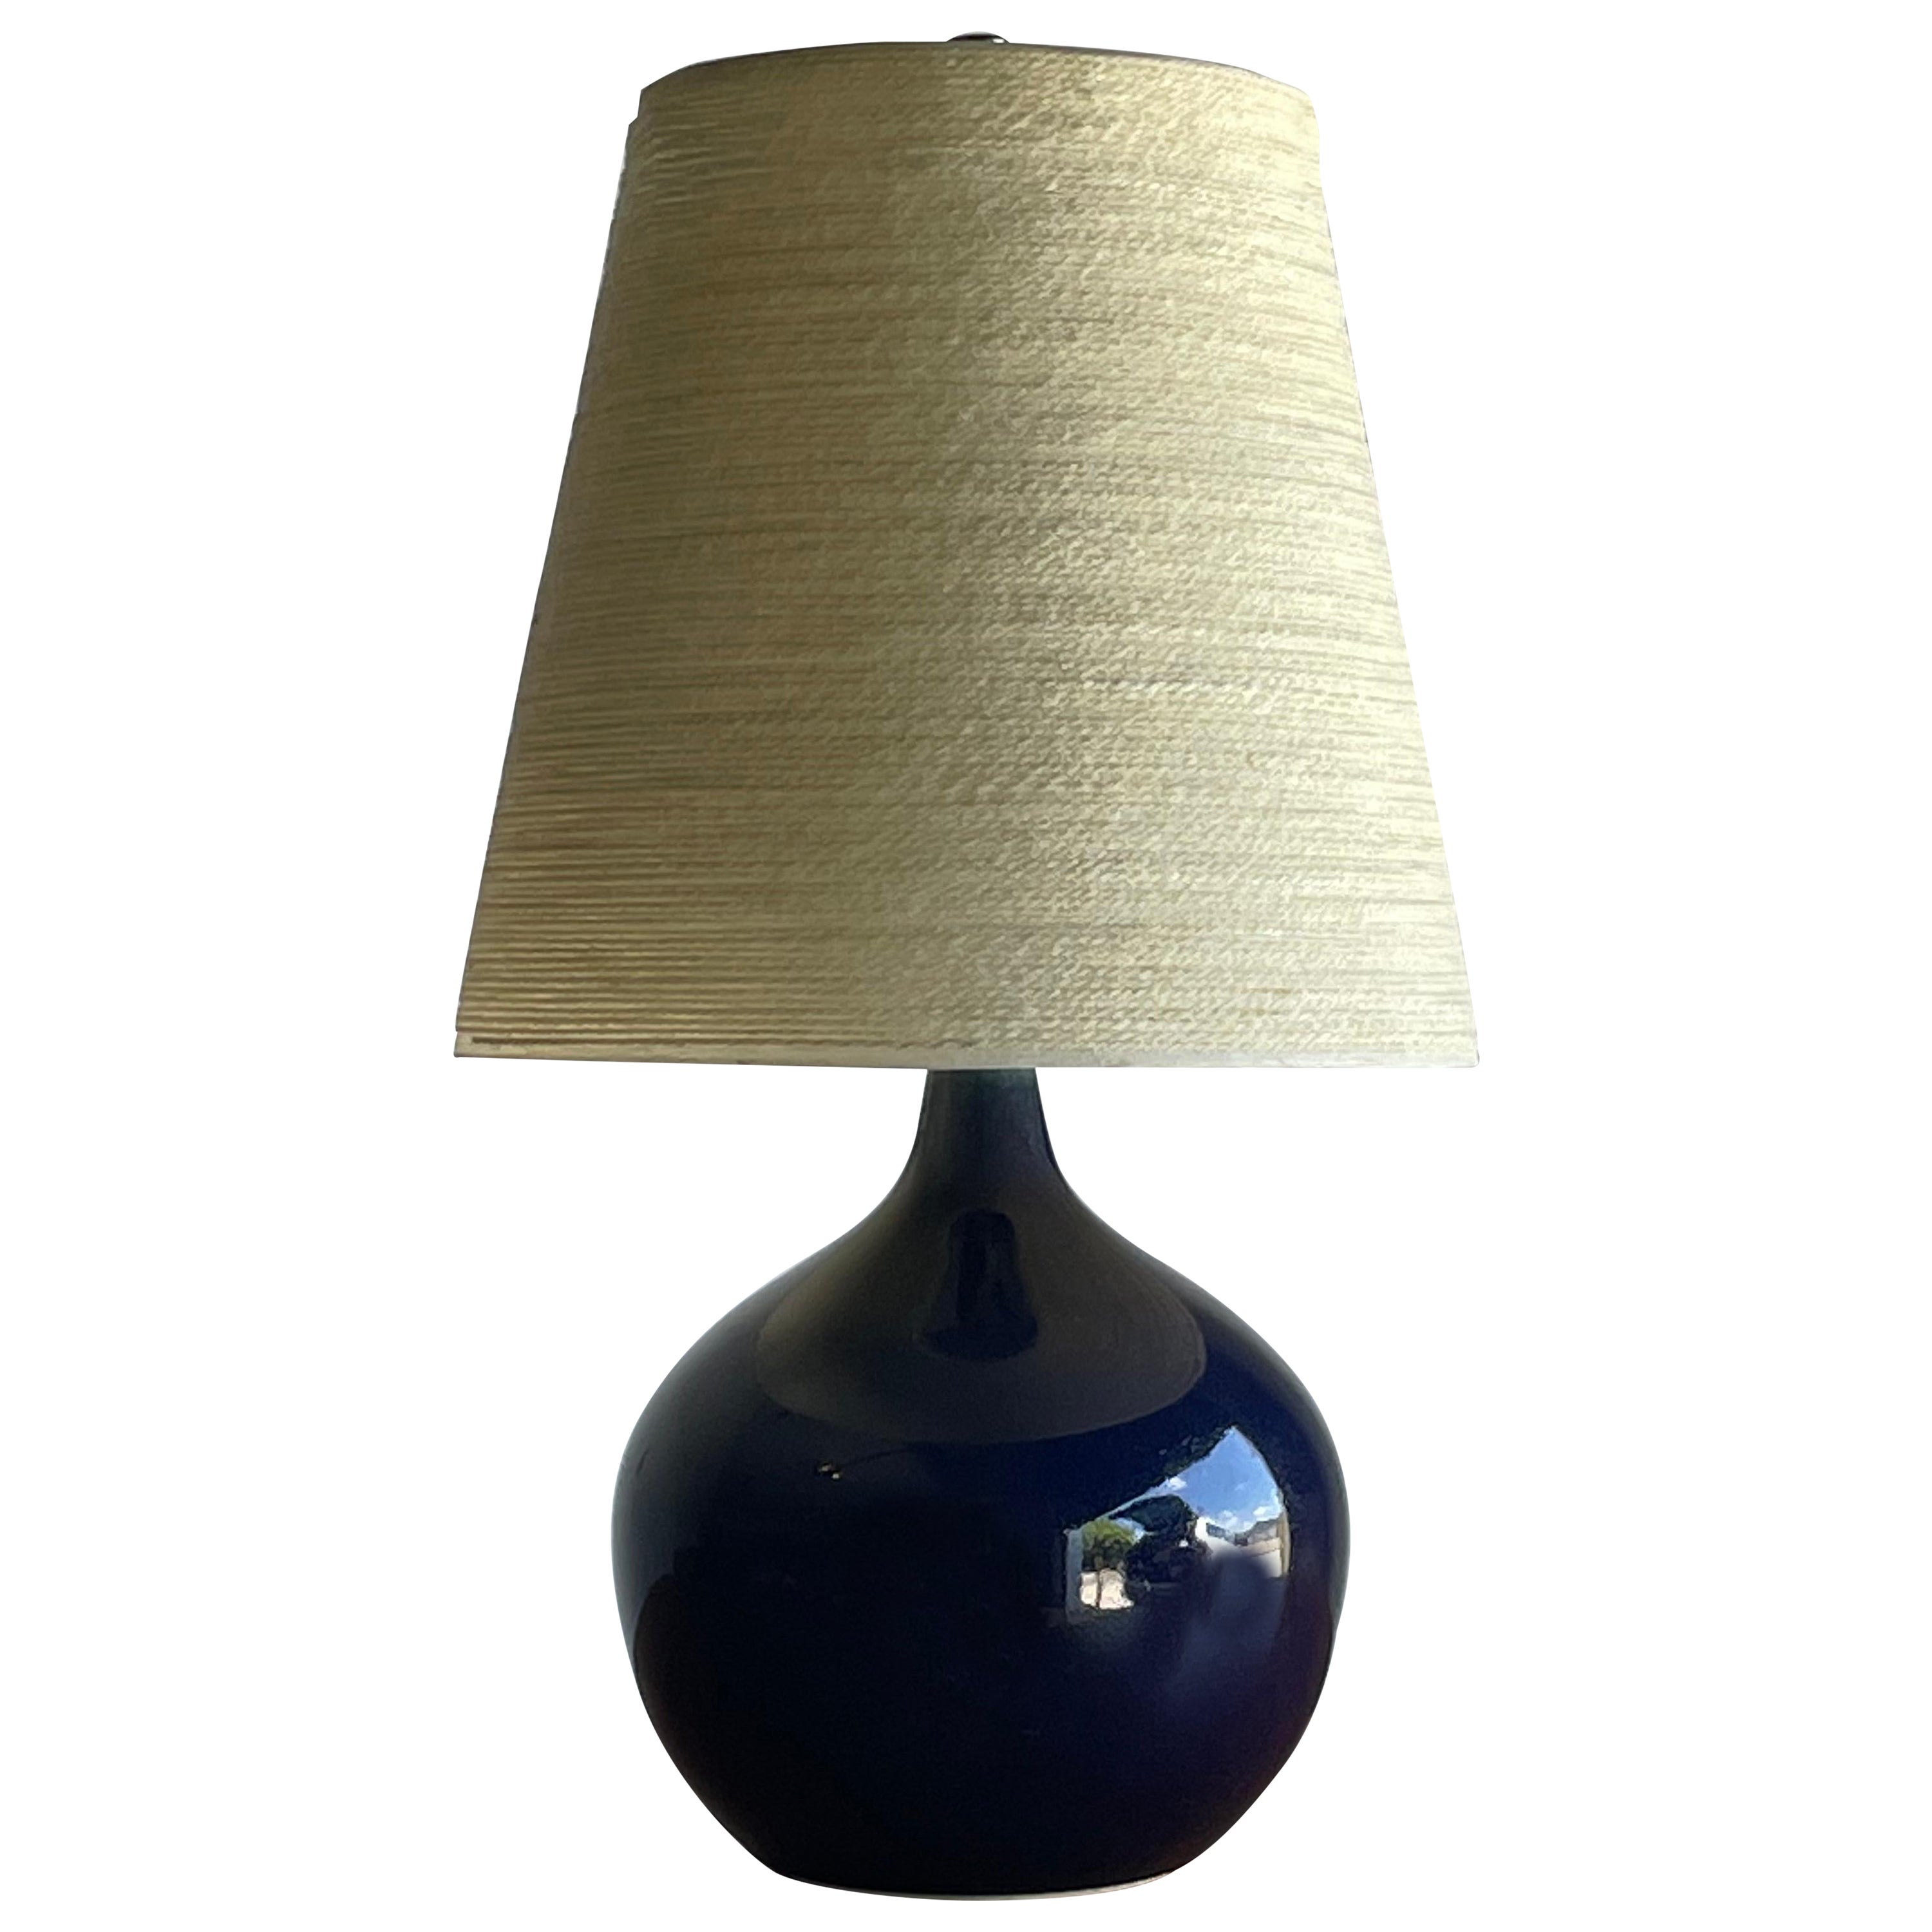 Lotte and Gunnar Bostlund Table Lamp in Royal Blue Ceramic